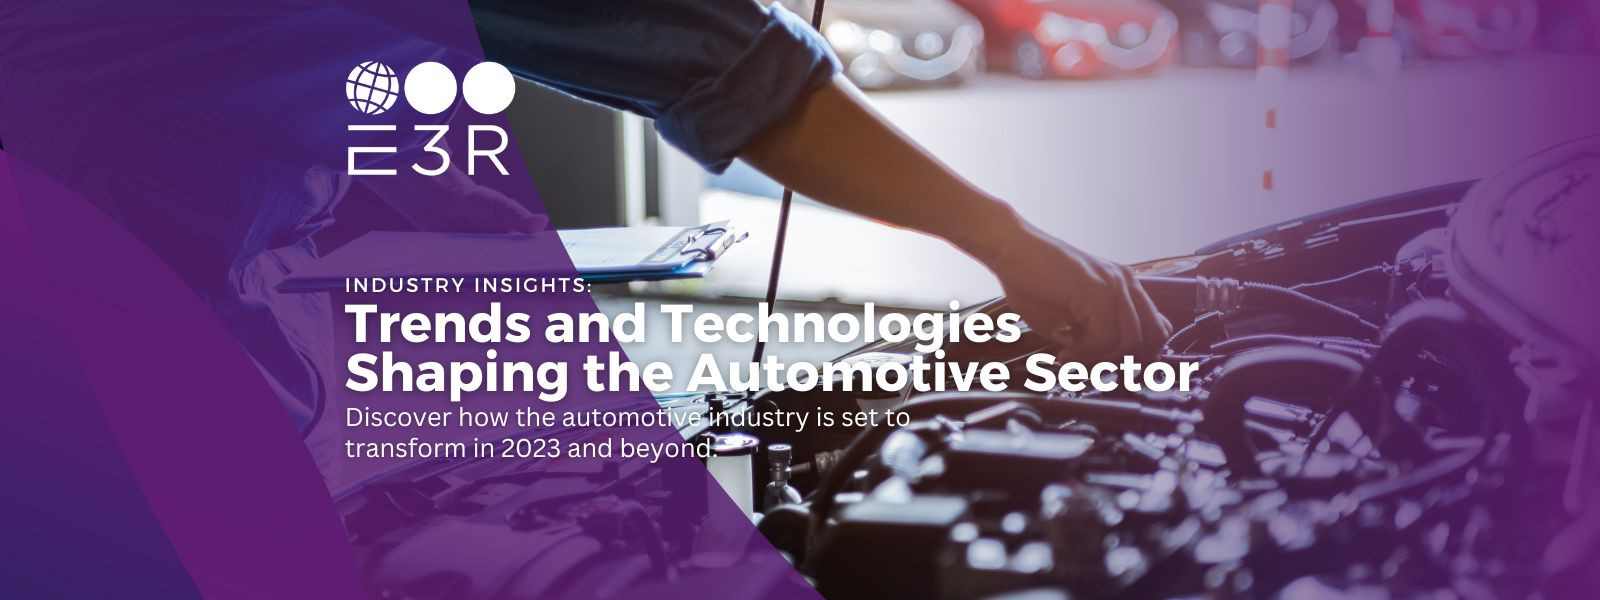 The UK Automotive Industry: Trends and Technologies Shaping the Sector